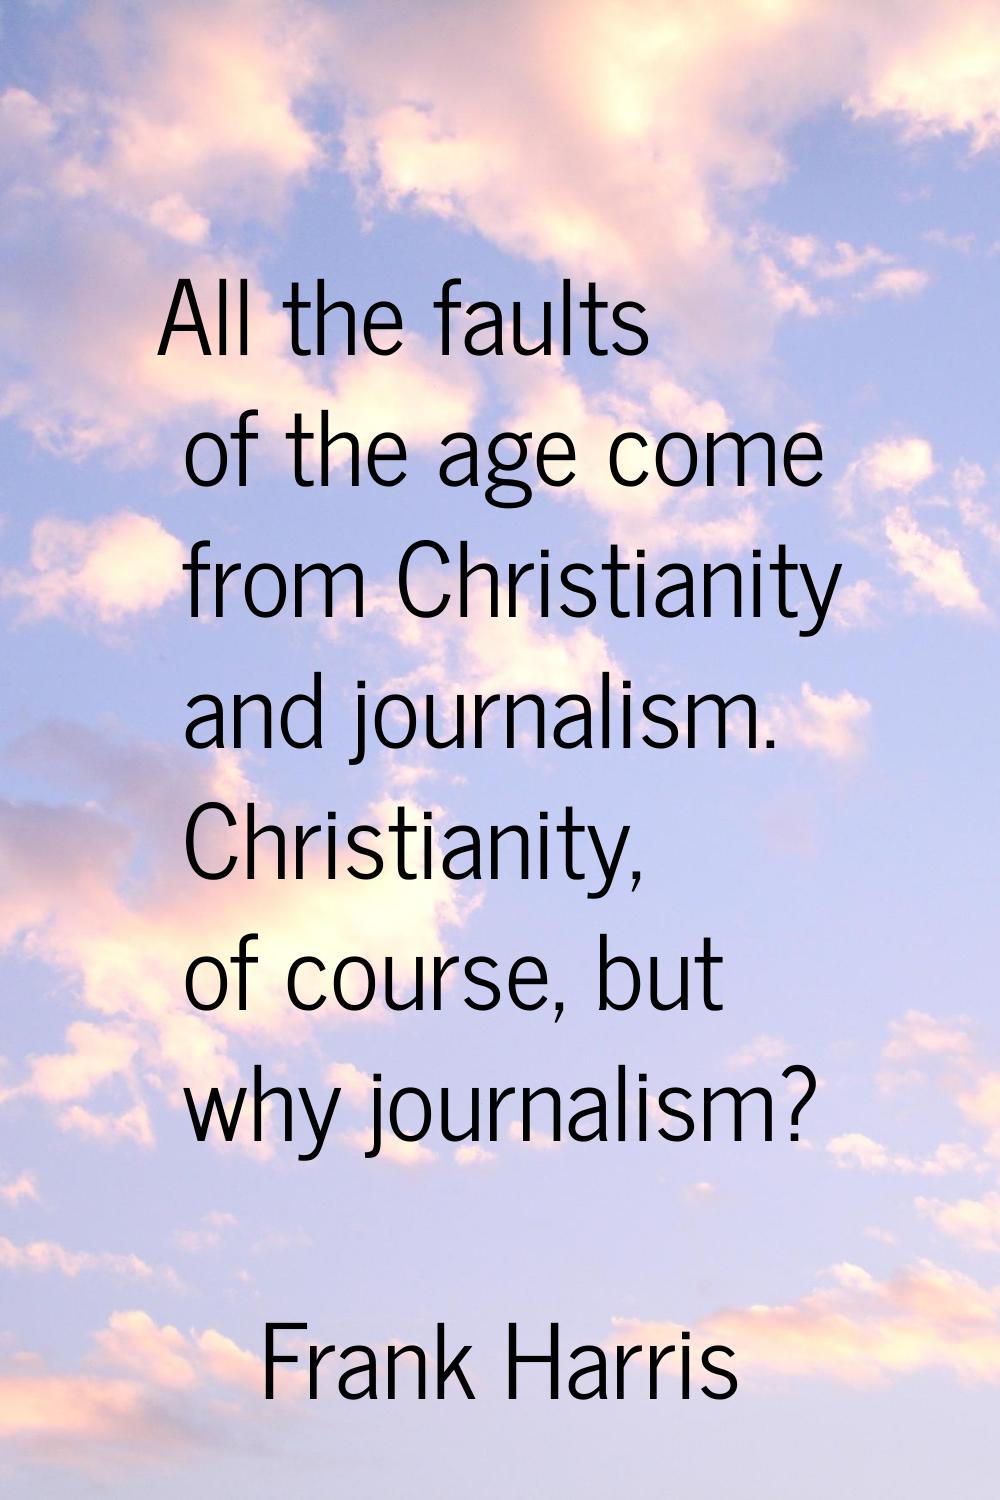 All the faults of the age come from Christianity and journalism. Christianity, of course, but why j